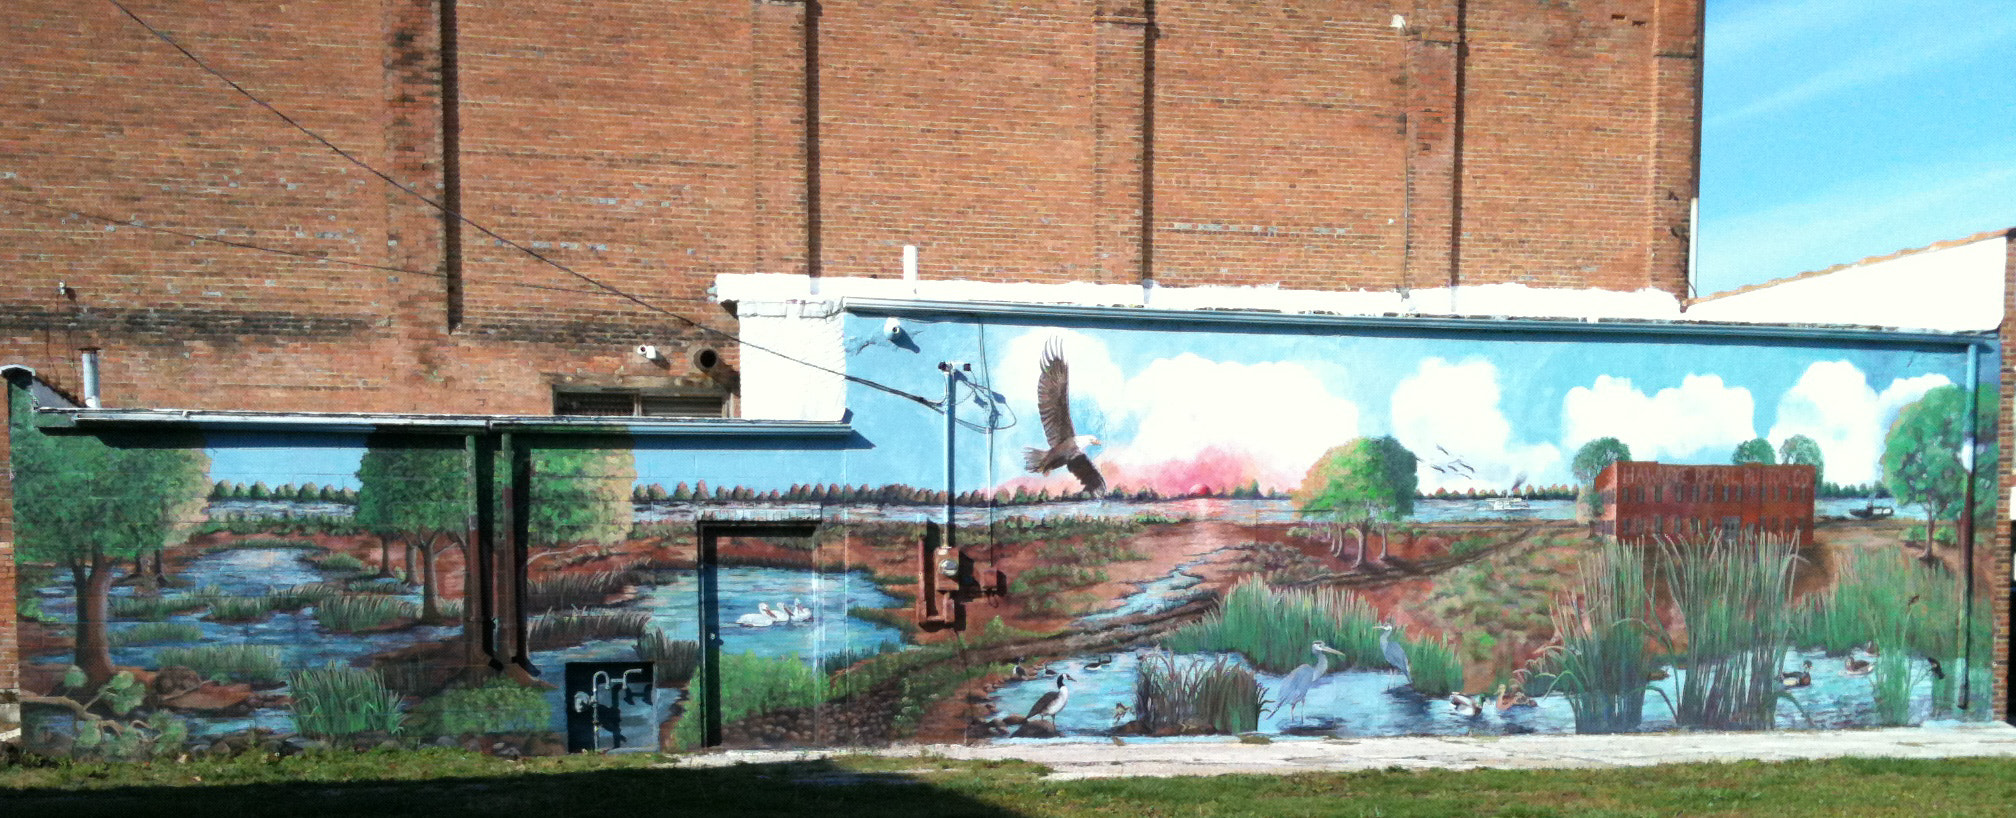 Apple iPhone 3GS sample photo. Small town mural photography